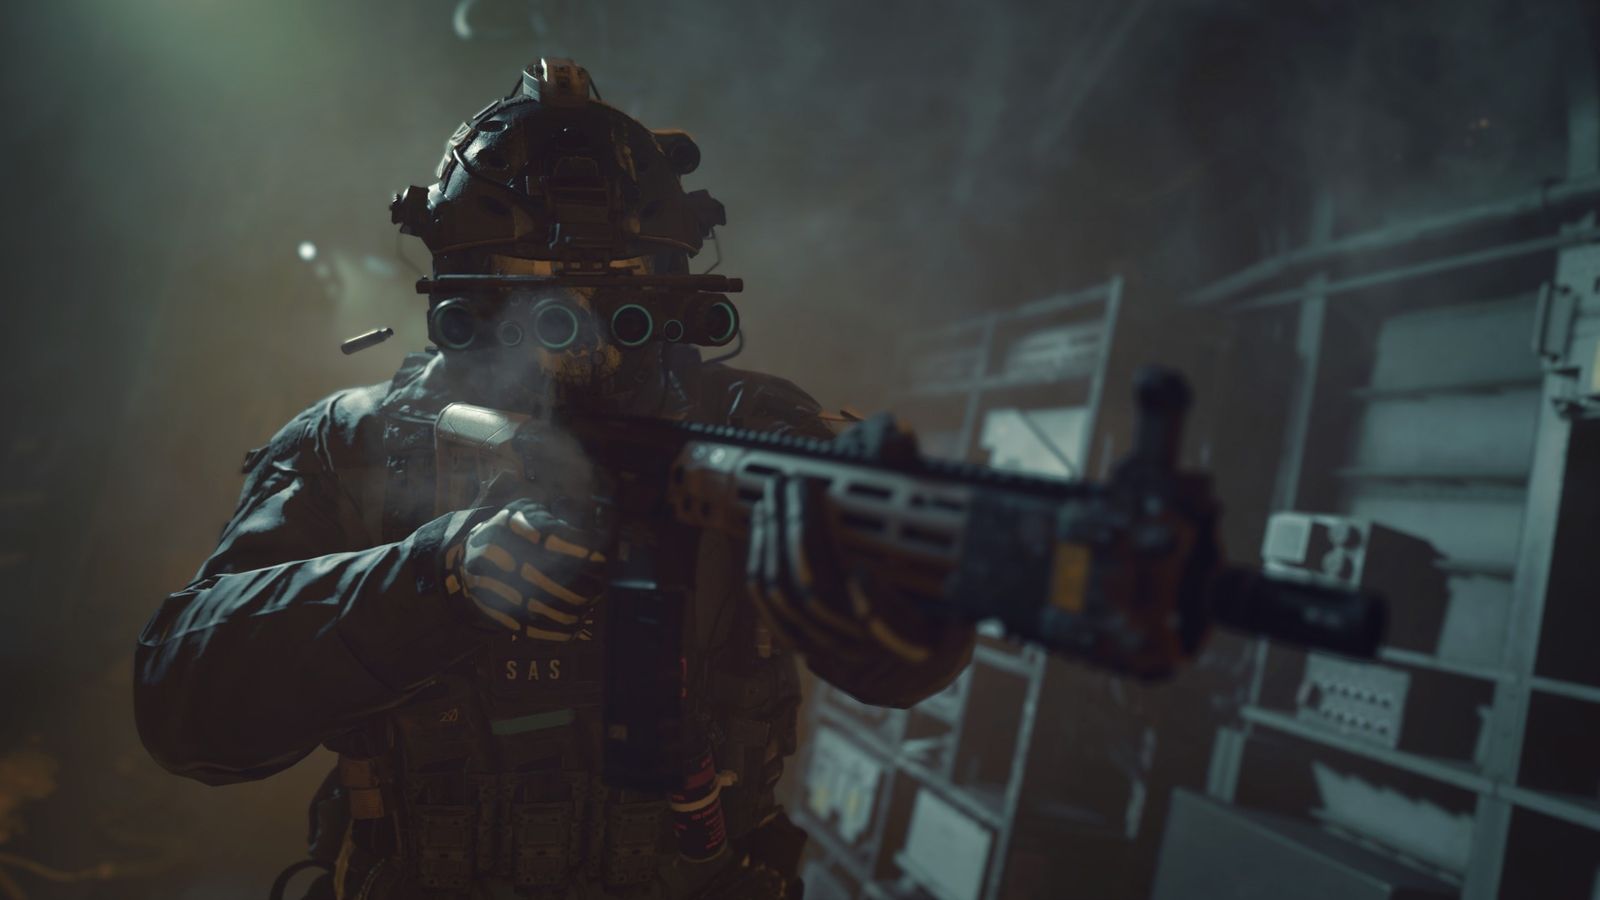 Image showing Modern Warfare 2 player holding assault rifle and wearing night-vision goggles